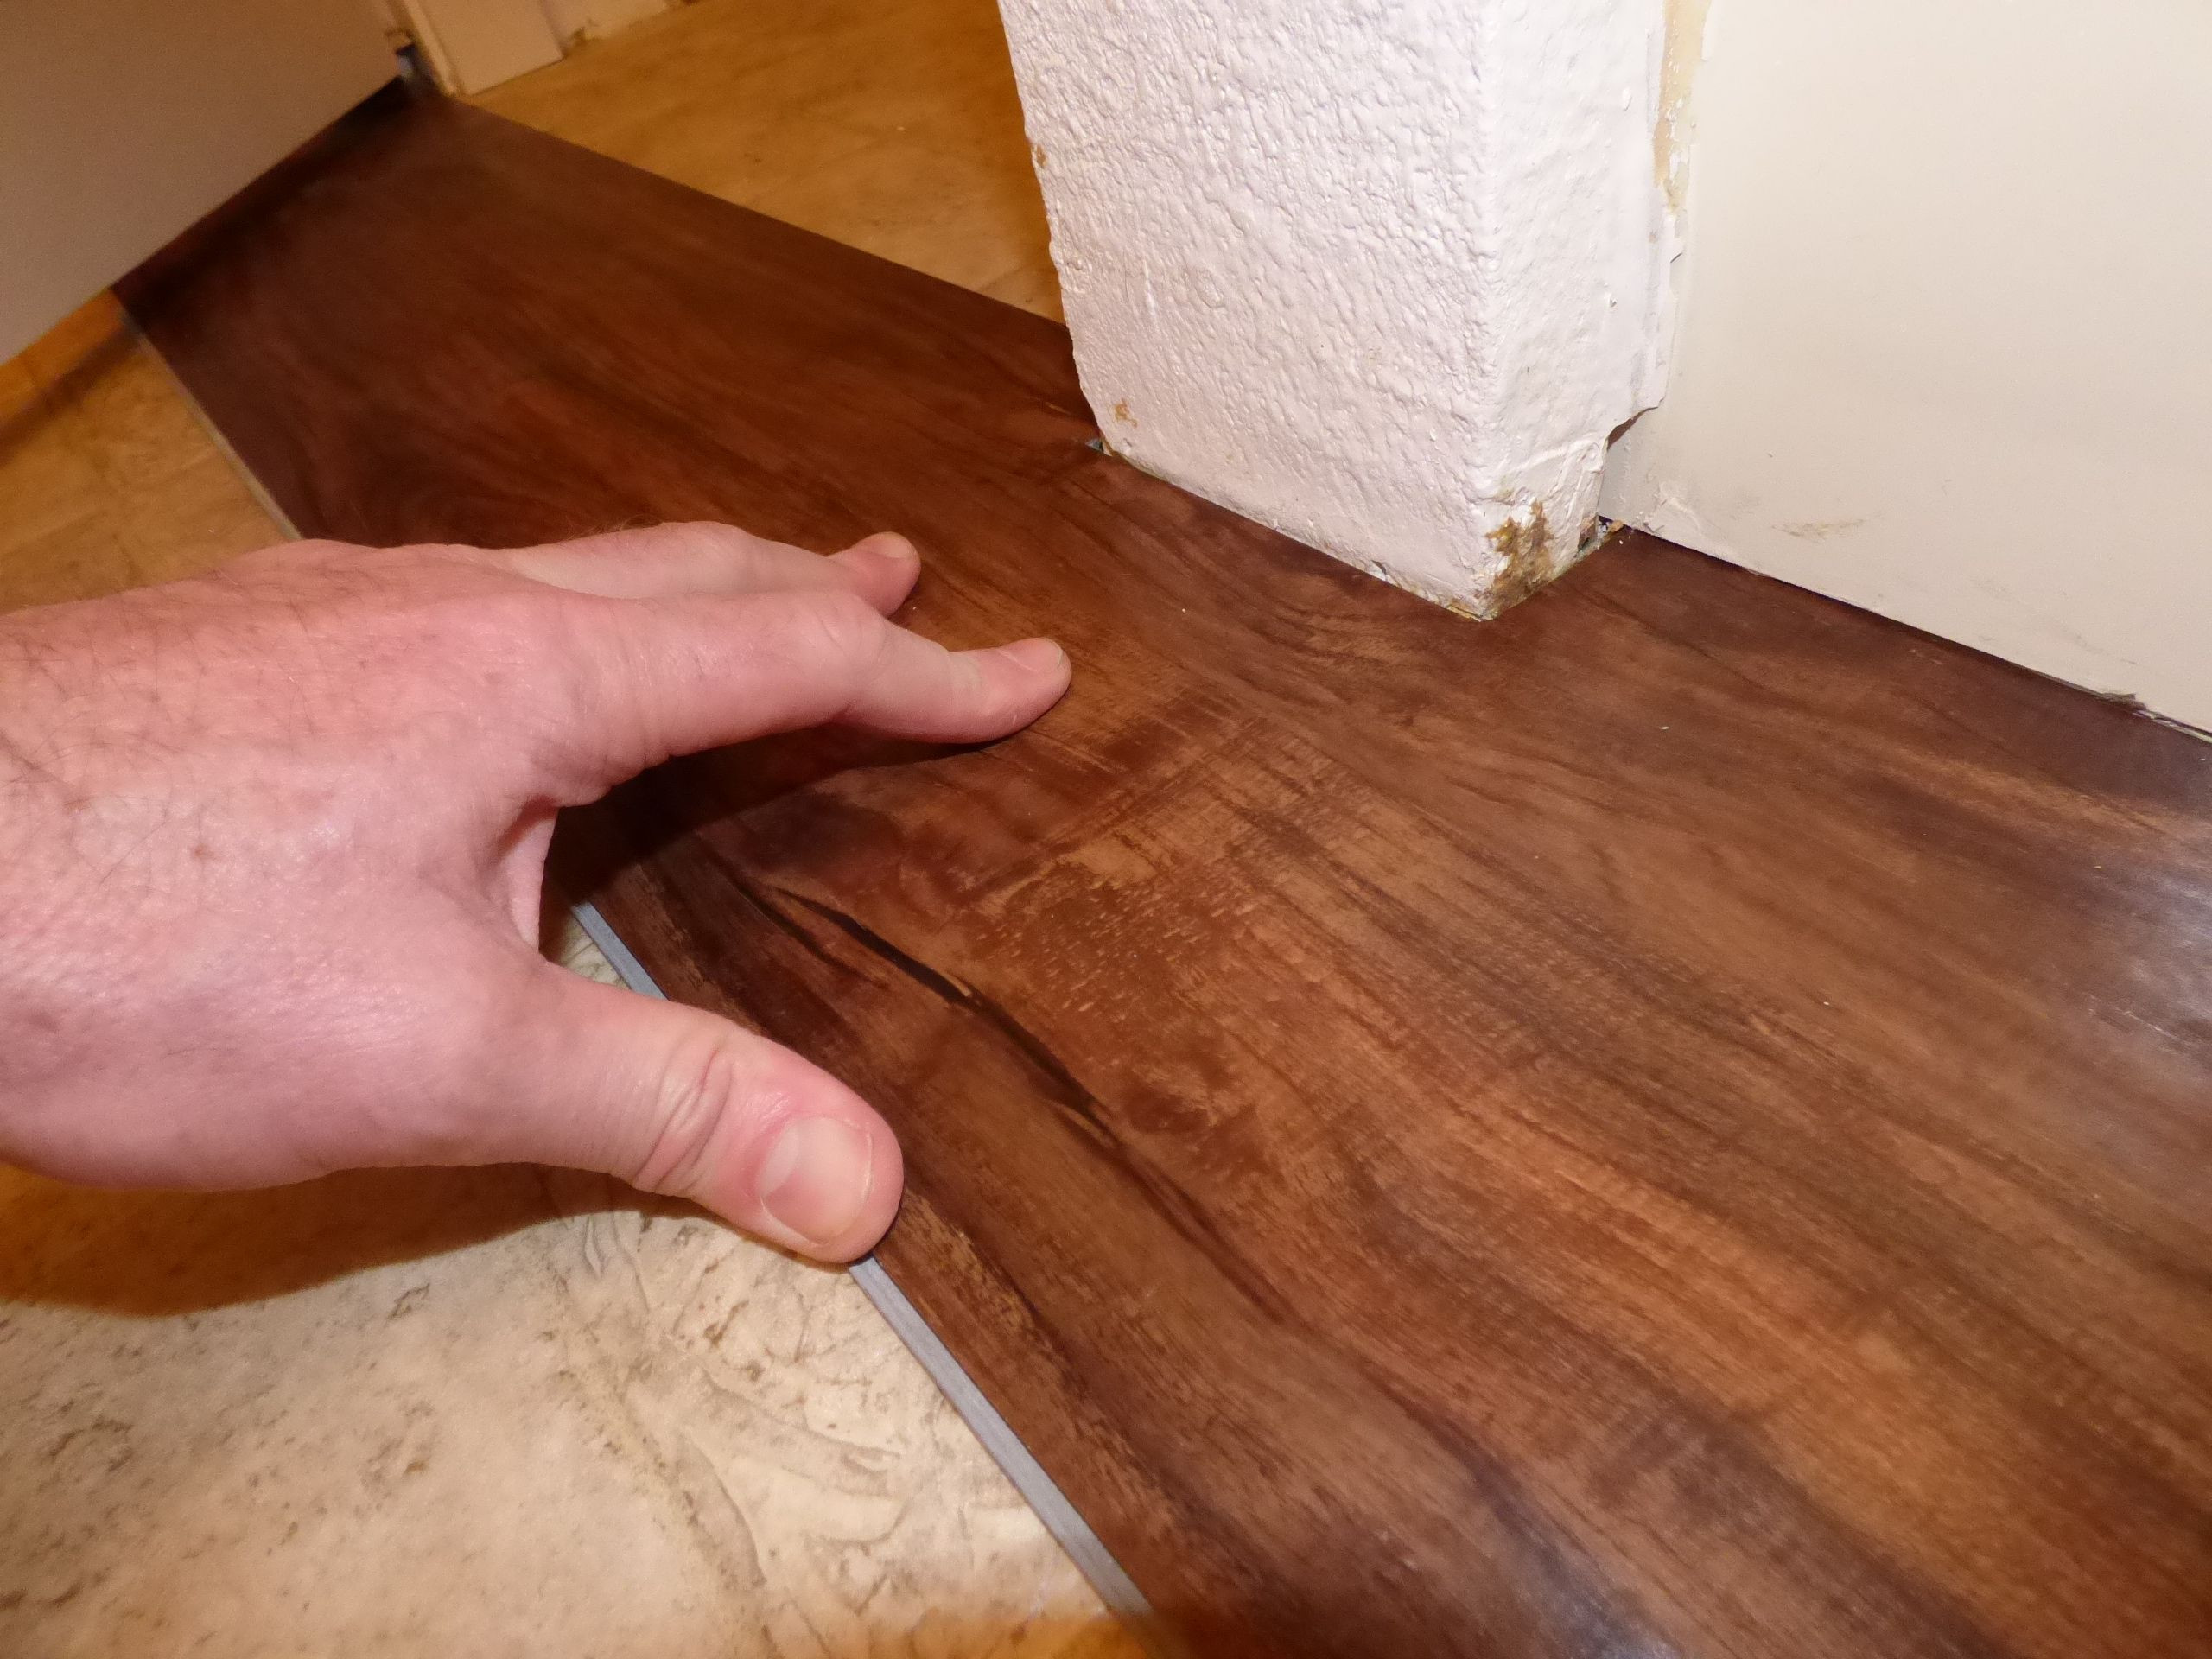 21 Fantastic How to Lay Hardwood Flooring Direction 2024 free download how to lay hardwood flooring direction of its easy and fast to install plank vinyl flooring with regard to fitting plank around protrusions 56a4a04f3df78cf7728350a3 jpg